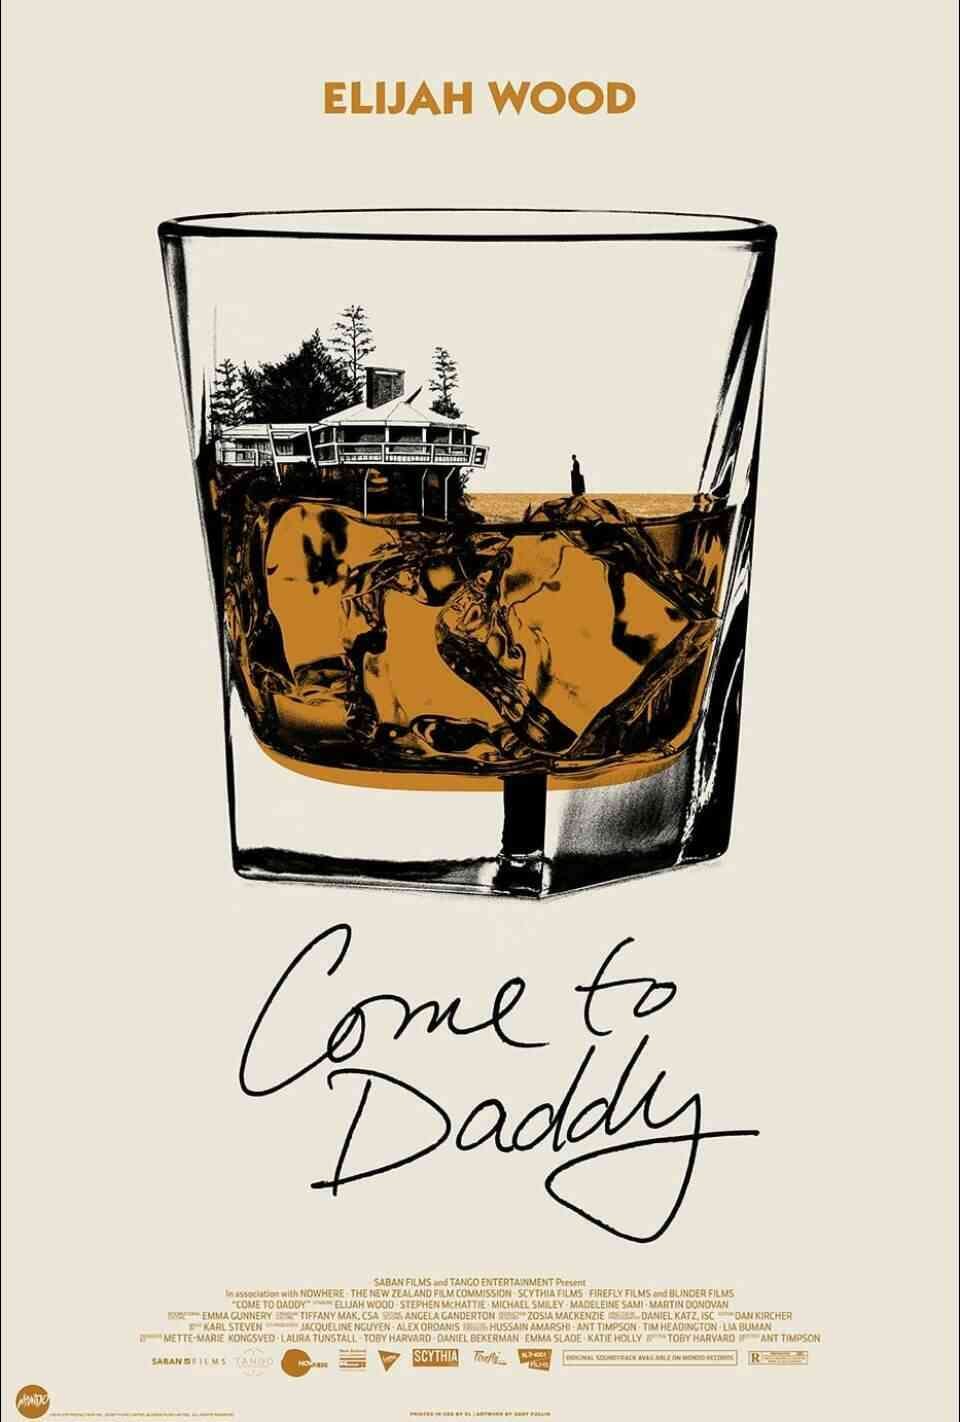 Read Come to Daddy screenplay (poster)